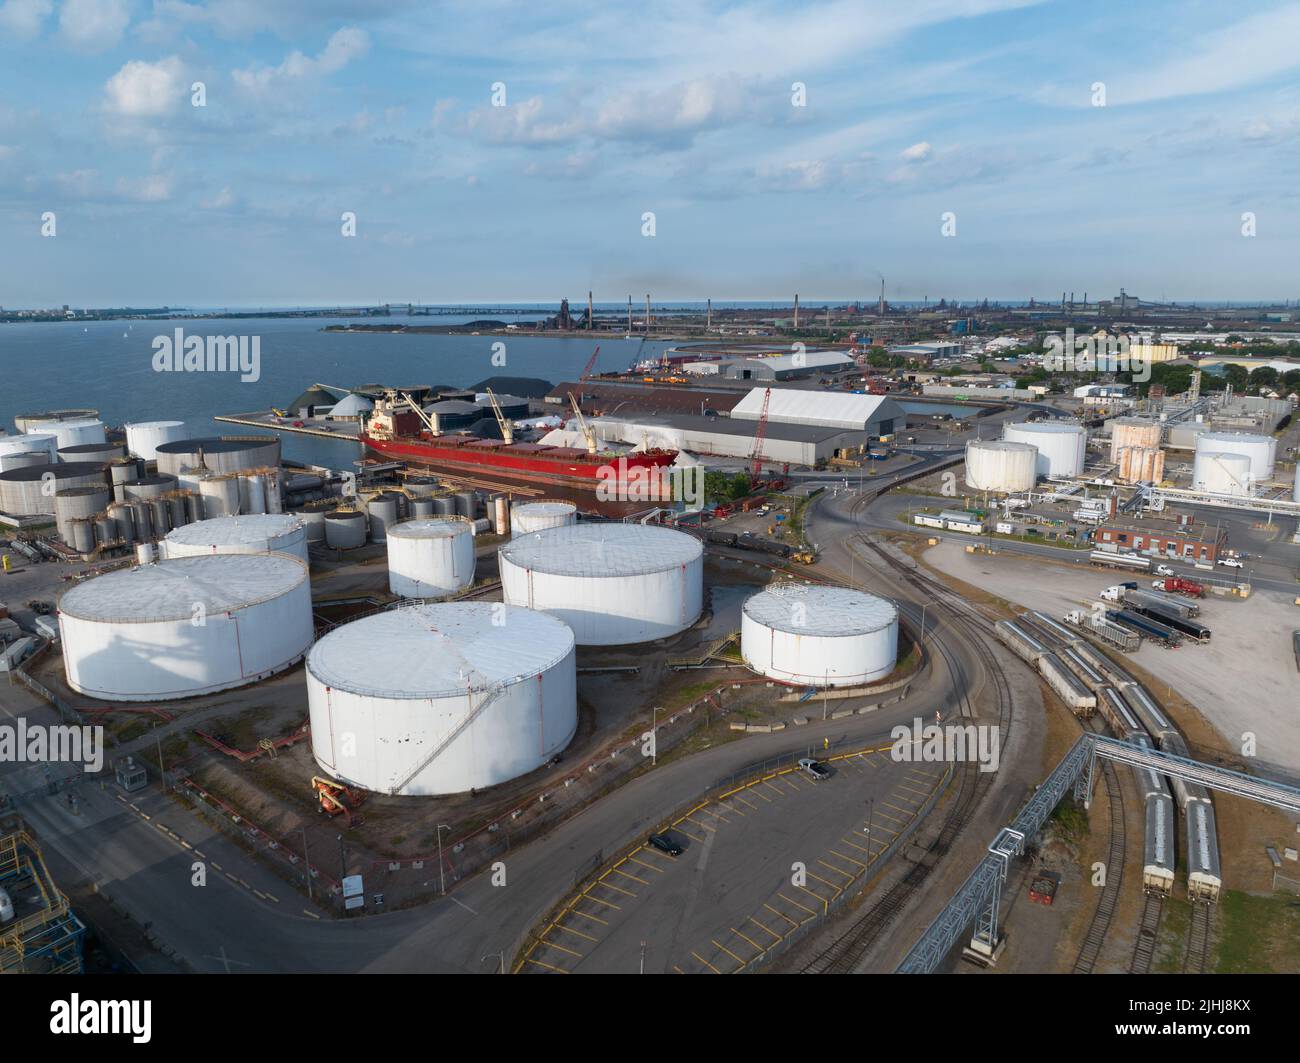 An aerial view of a white petroleum or oil tank field located next to a port. Pictured during the day while a cargo vessel is stationary. Stock Photo